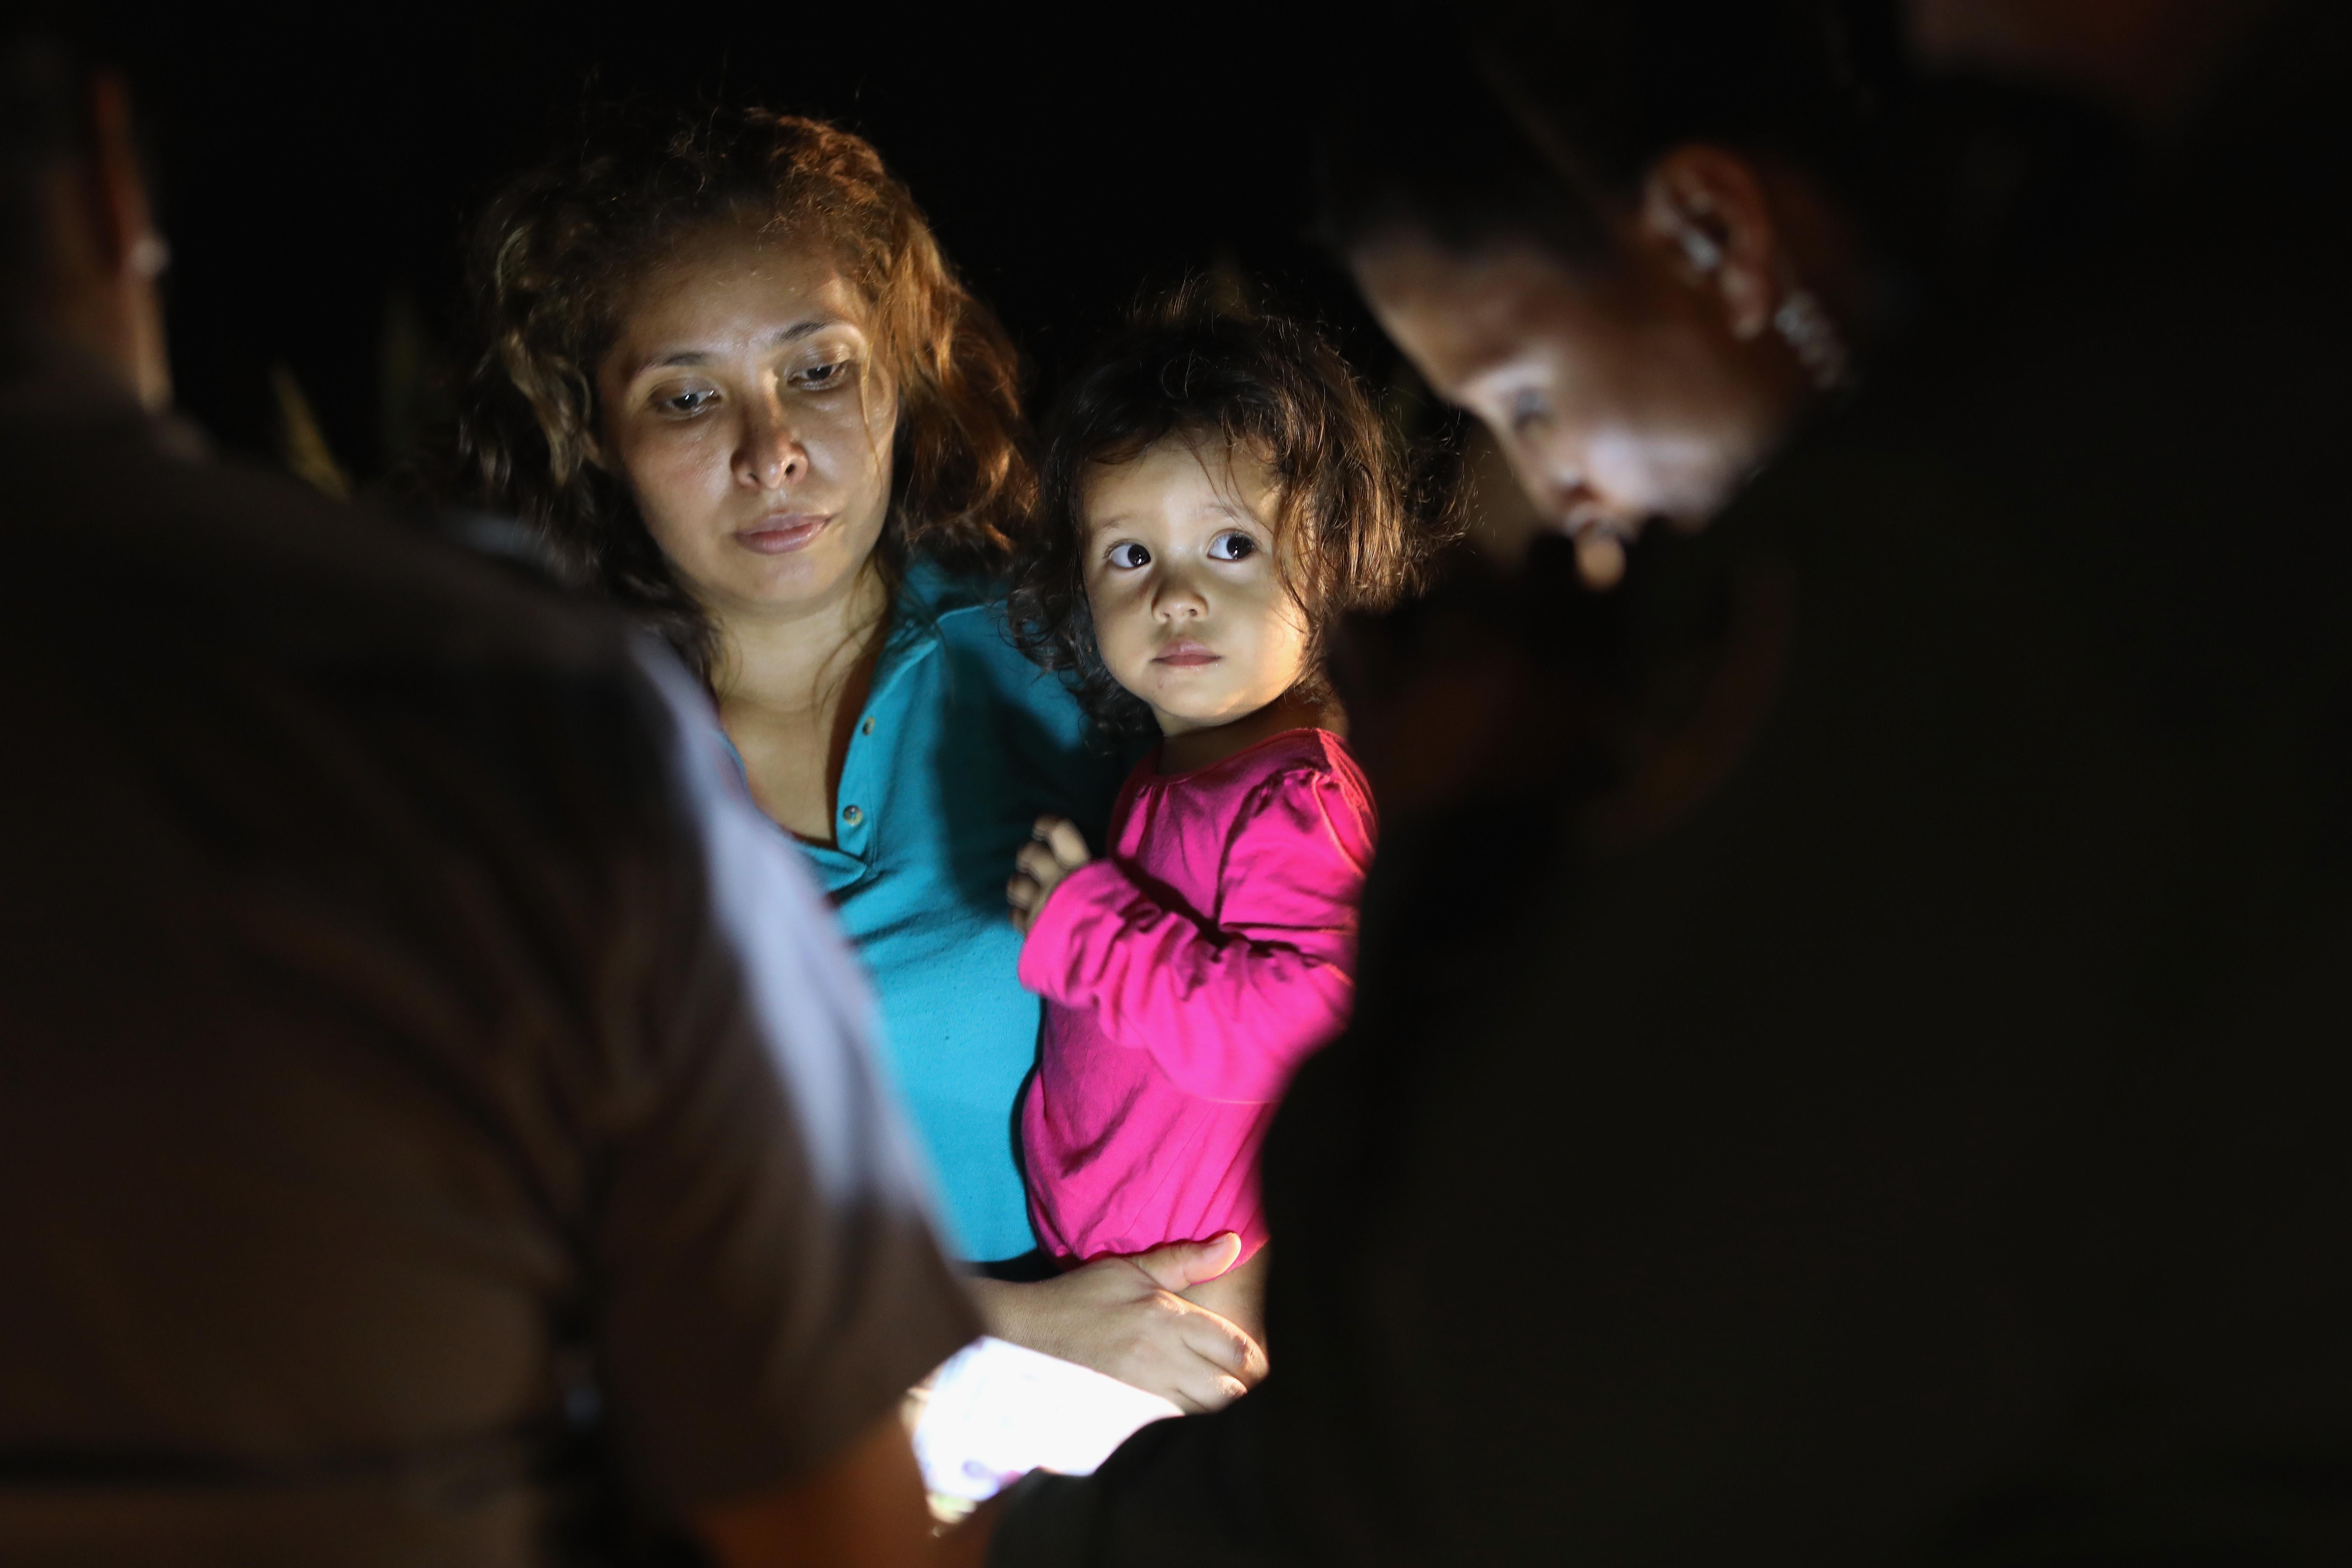 Central American asylum seekers, including a Honduran girl, 2, and her mother, are taken into custody near the U.S.-Mexico border on June 12, 2018 in McAllen, Texas. 